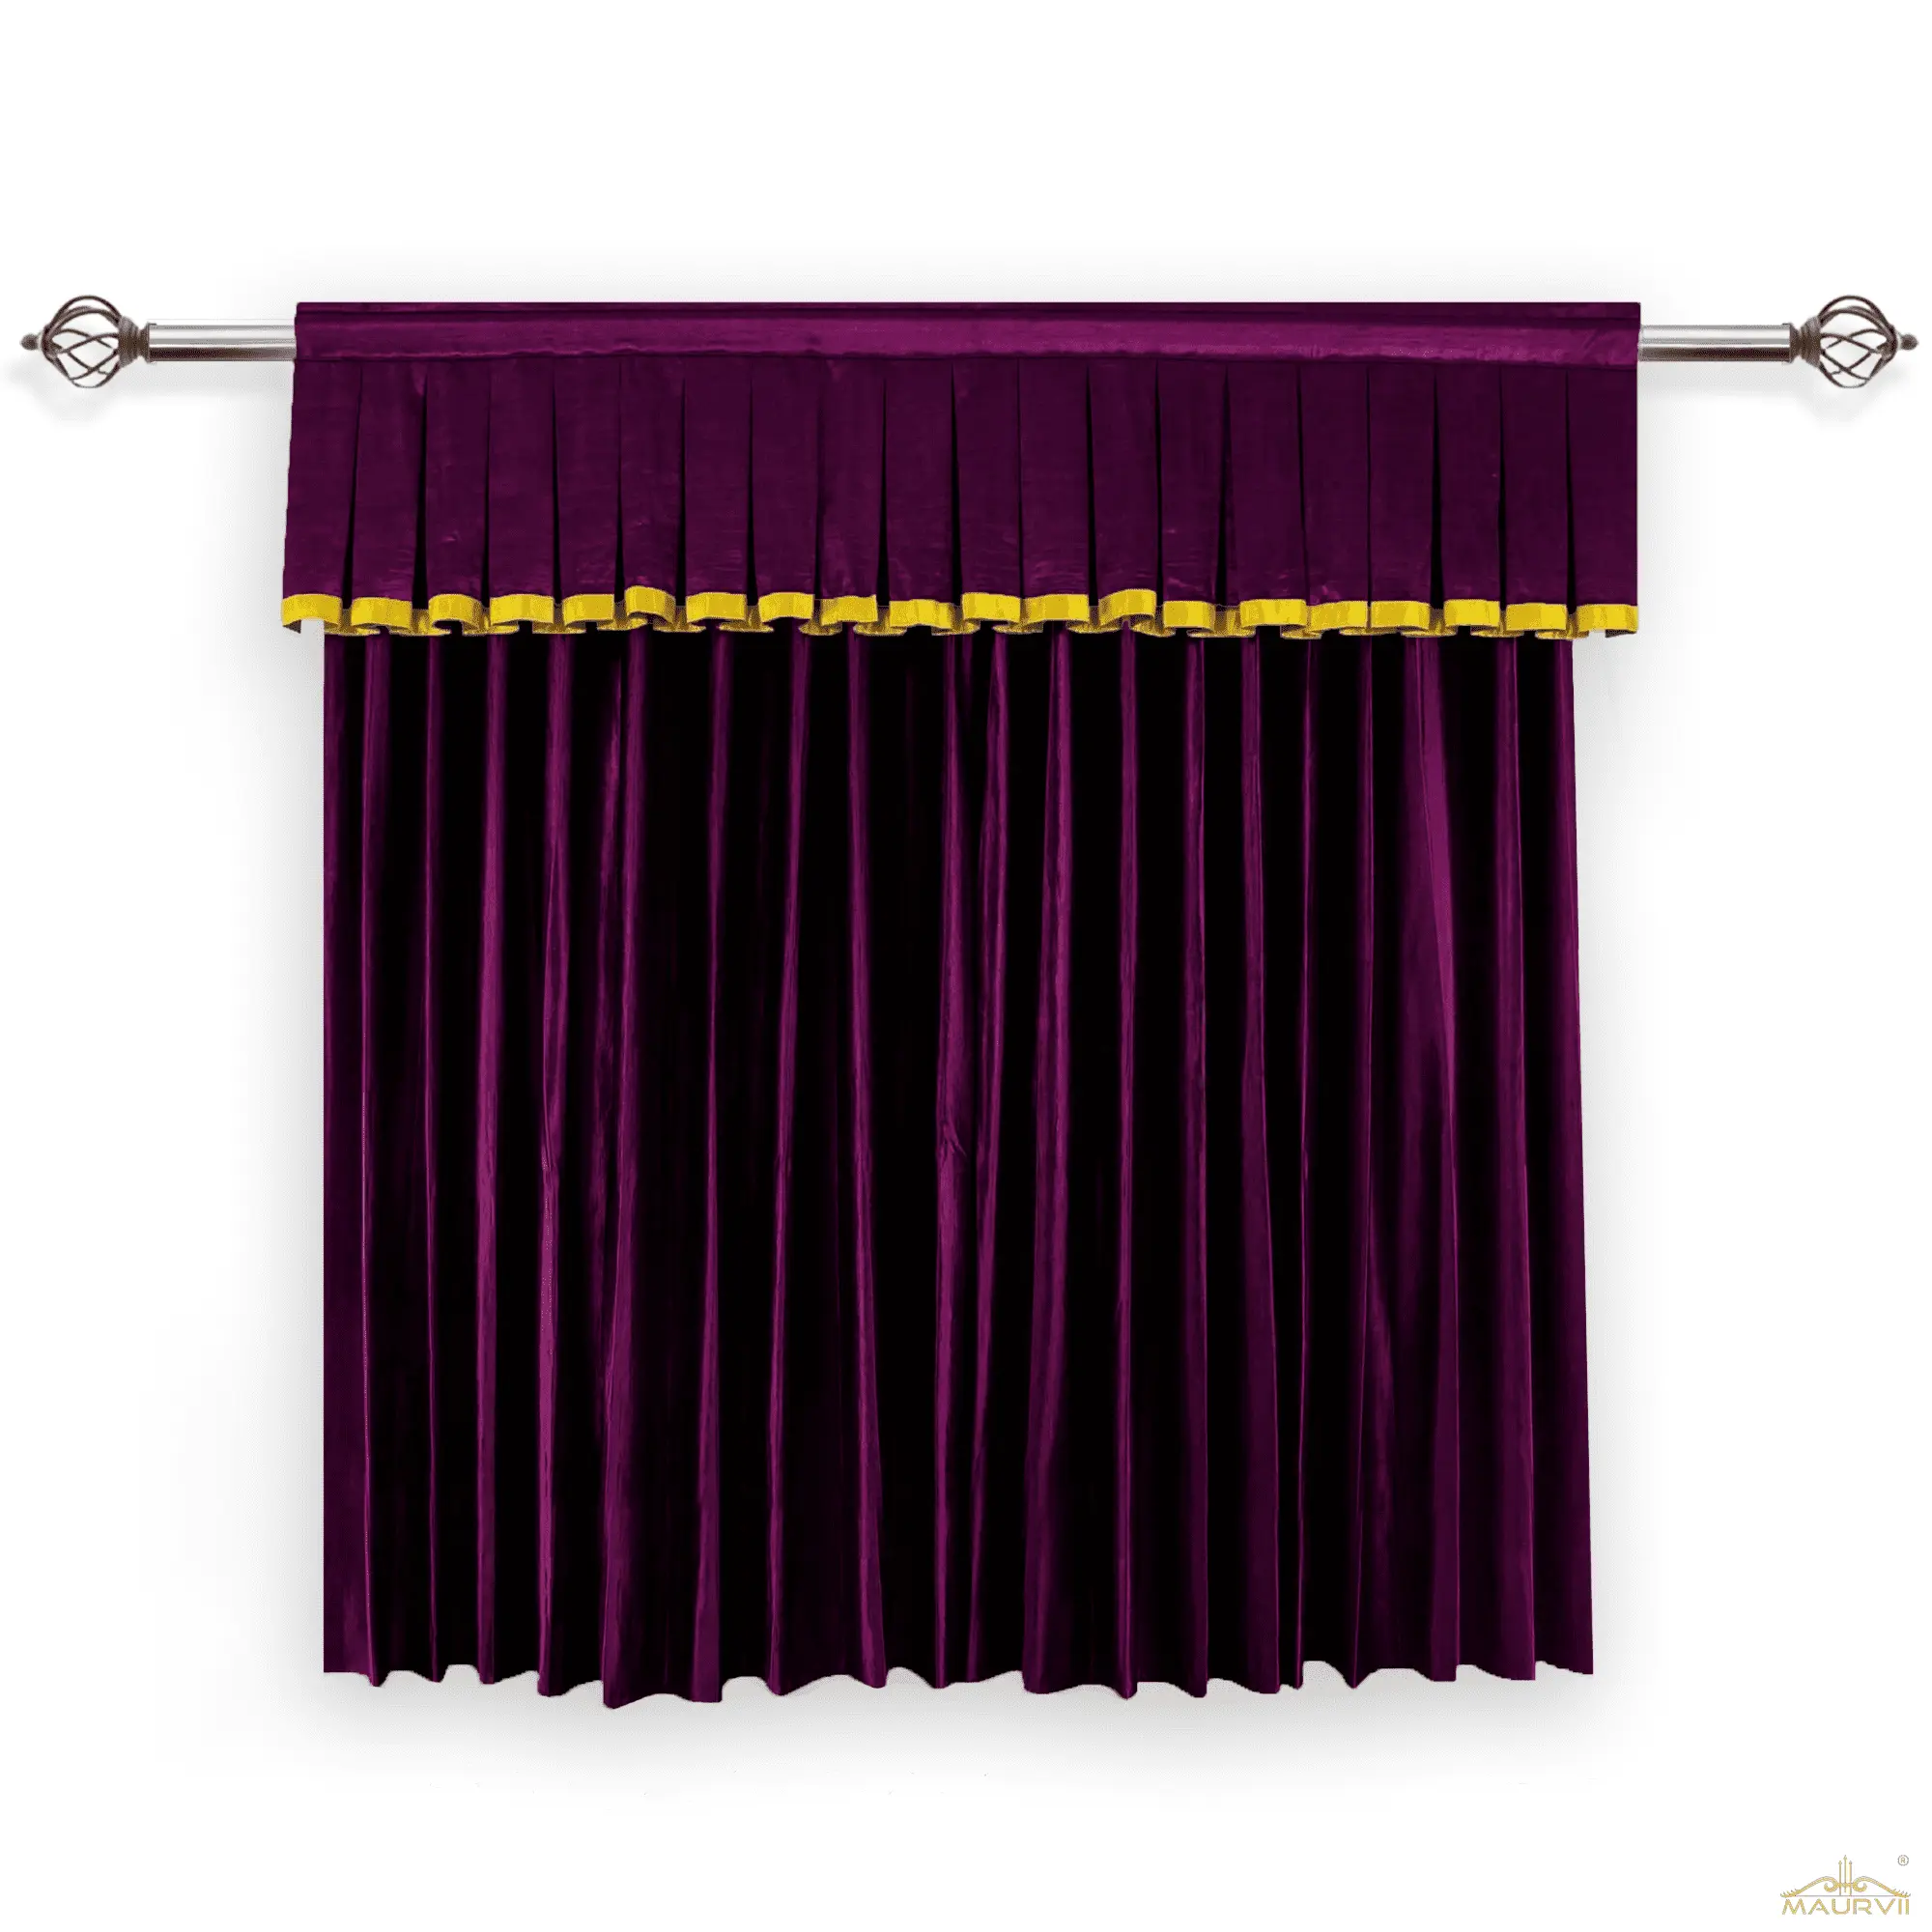 Plum Home Theater Curtain With Golden Trim